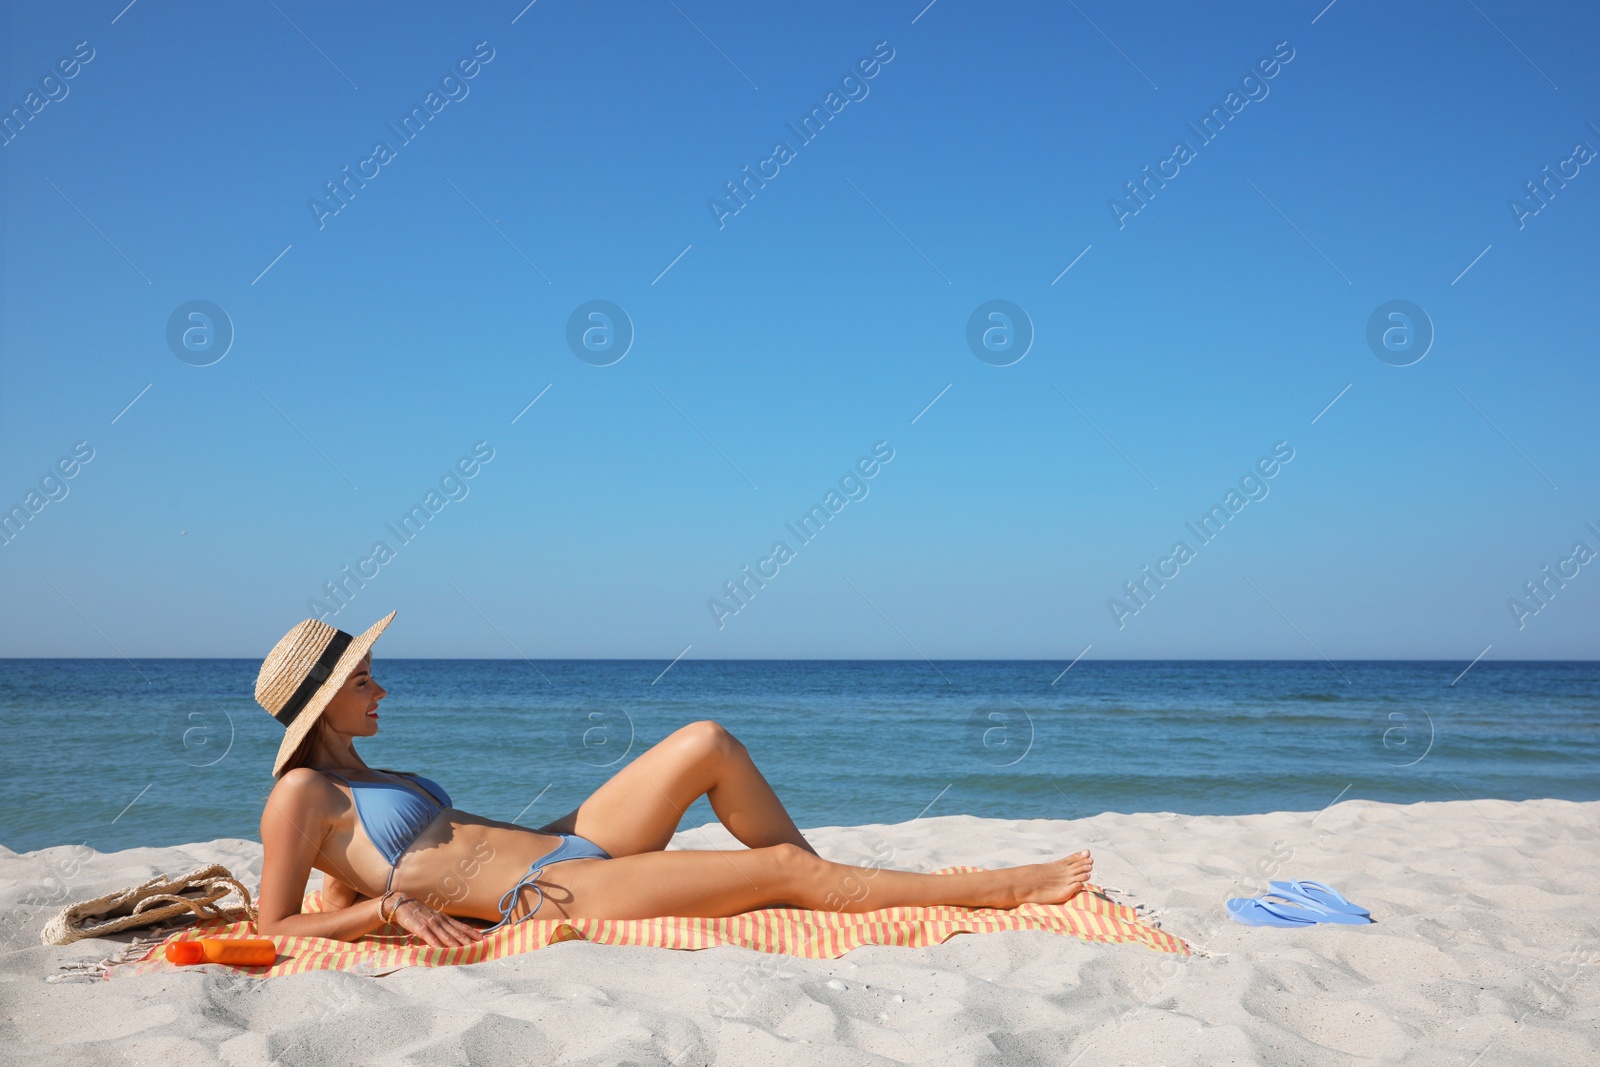 Photo of Woman with towel and other beach stuff on sand near sea